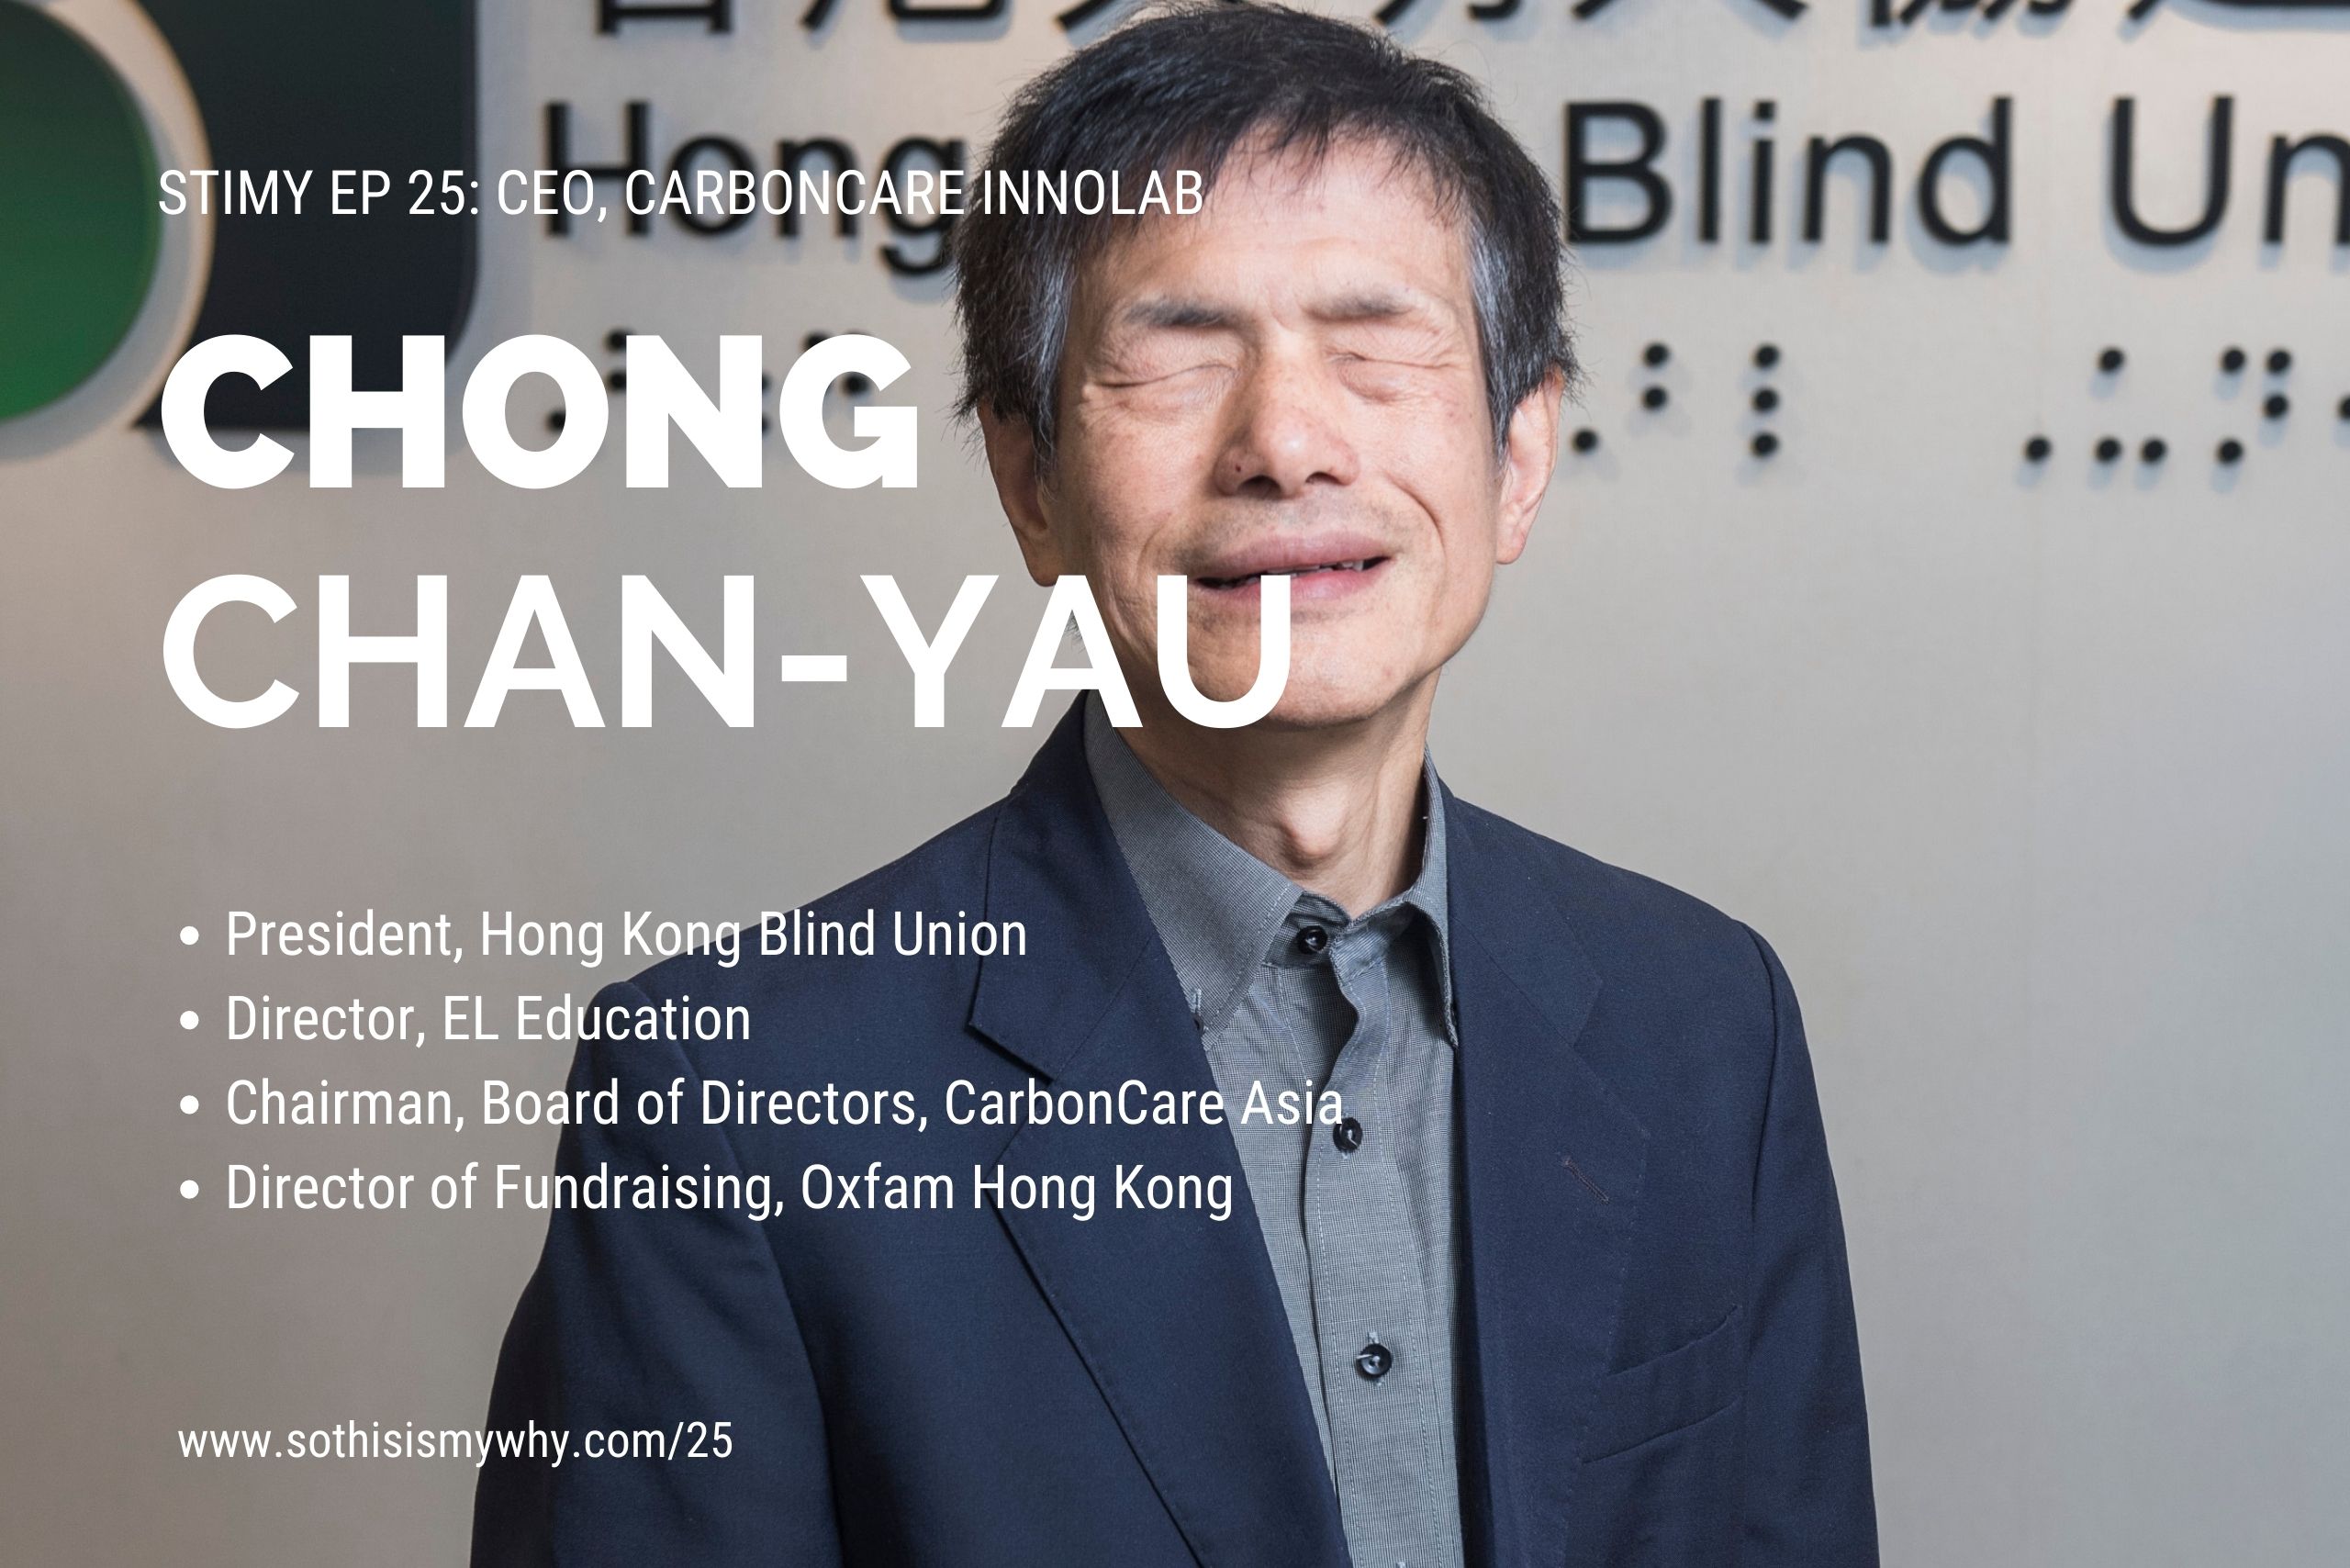 Chong Chan Yau - CEO & Co-Founder of Carboncare Innolab Hong Kong, President of Hong Kong Blind Union